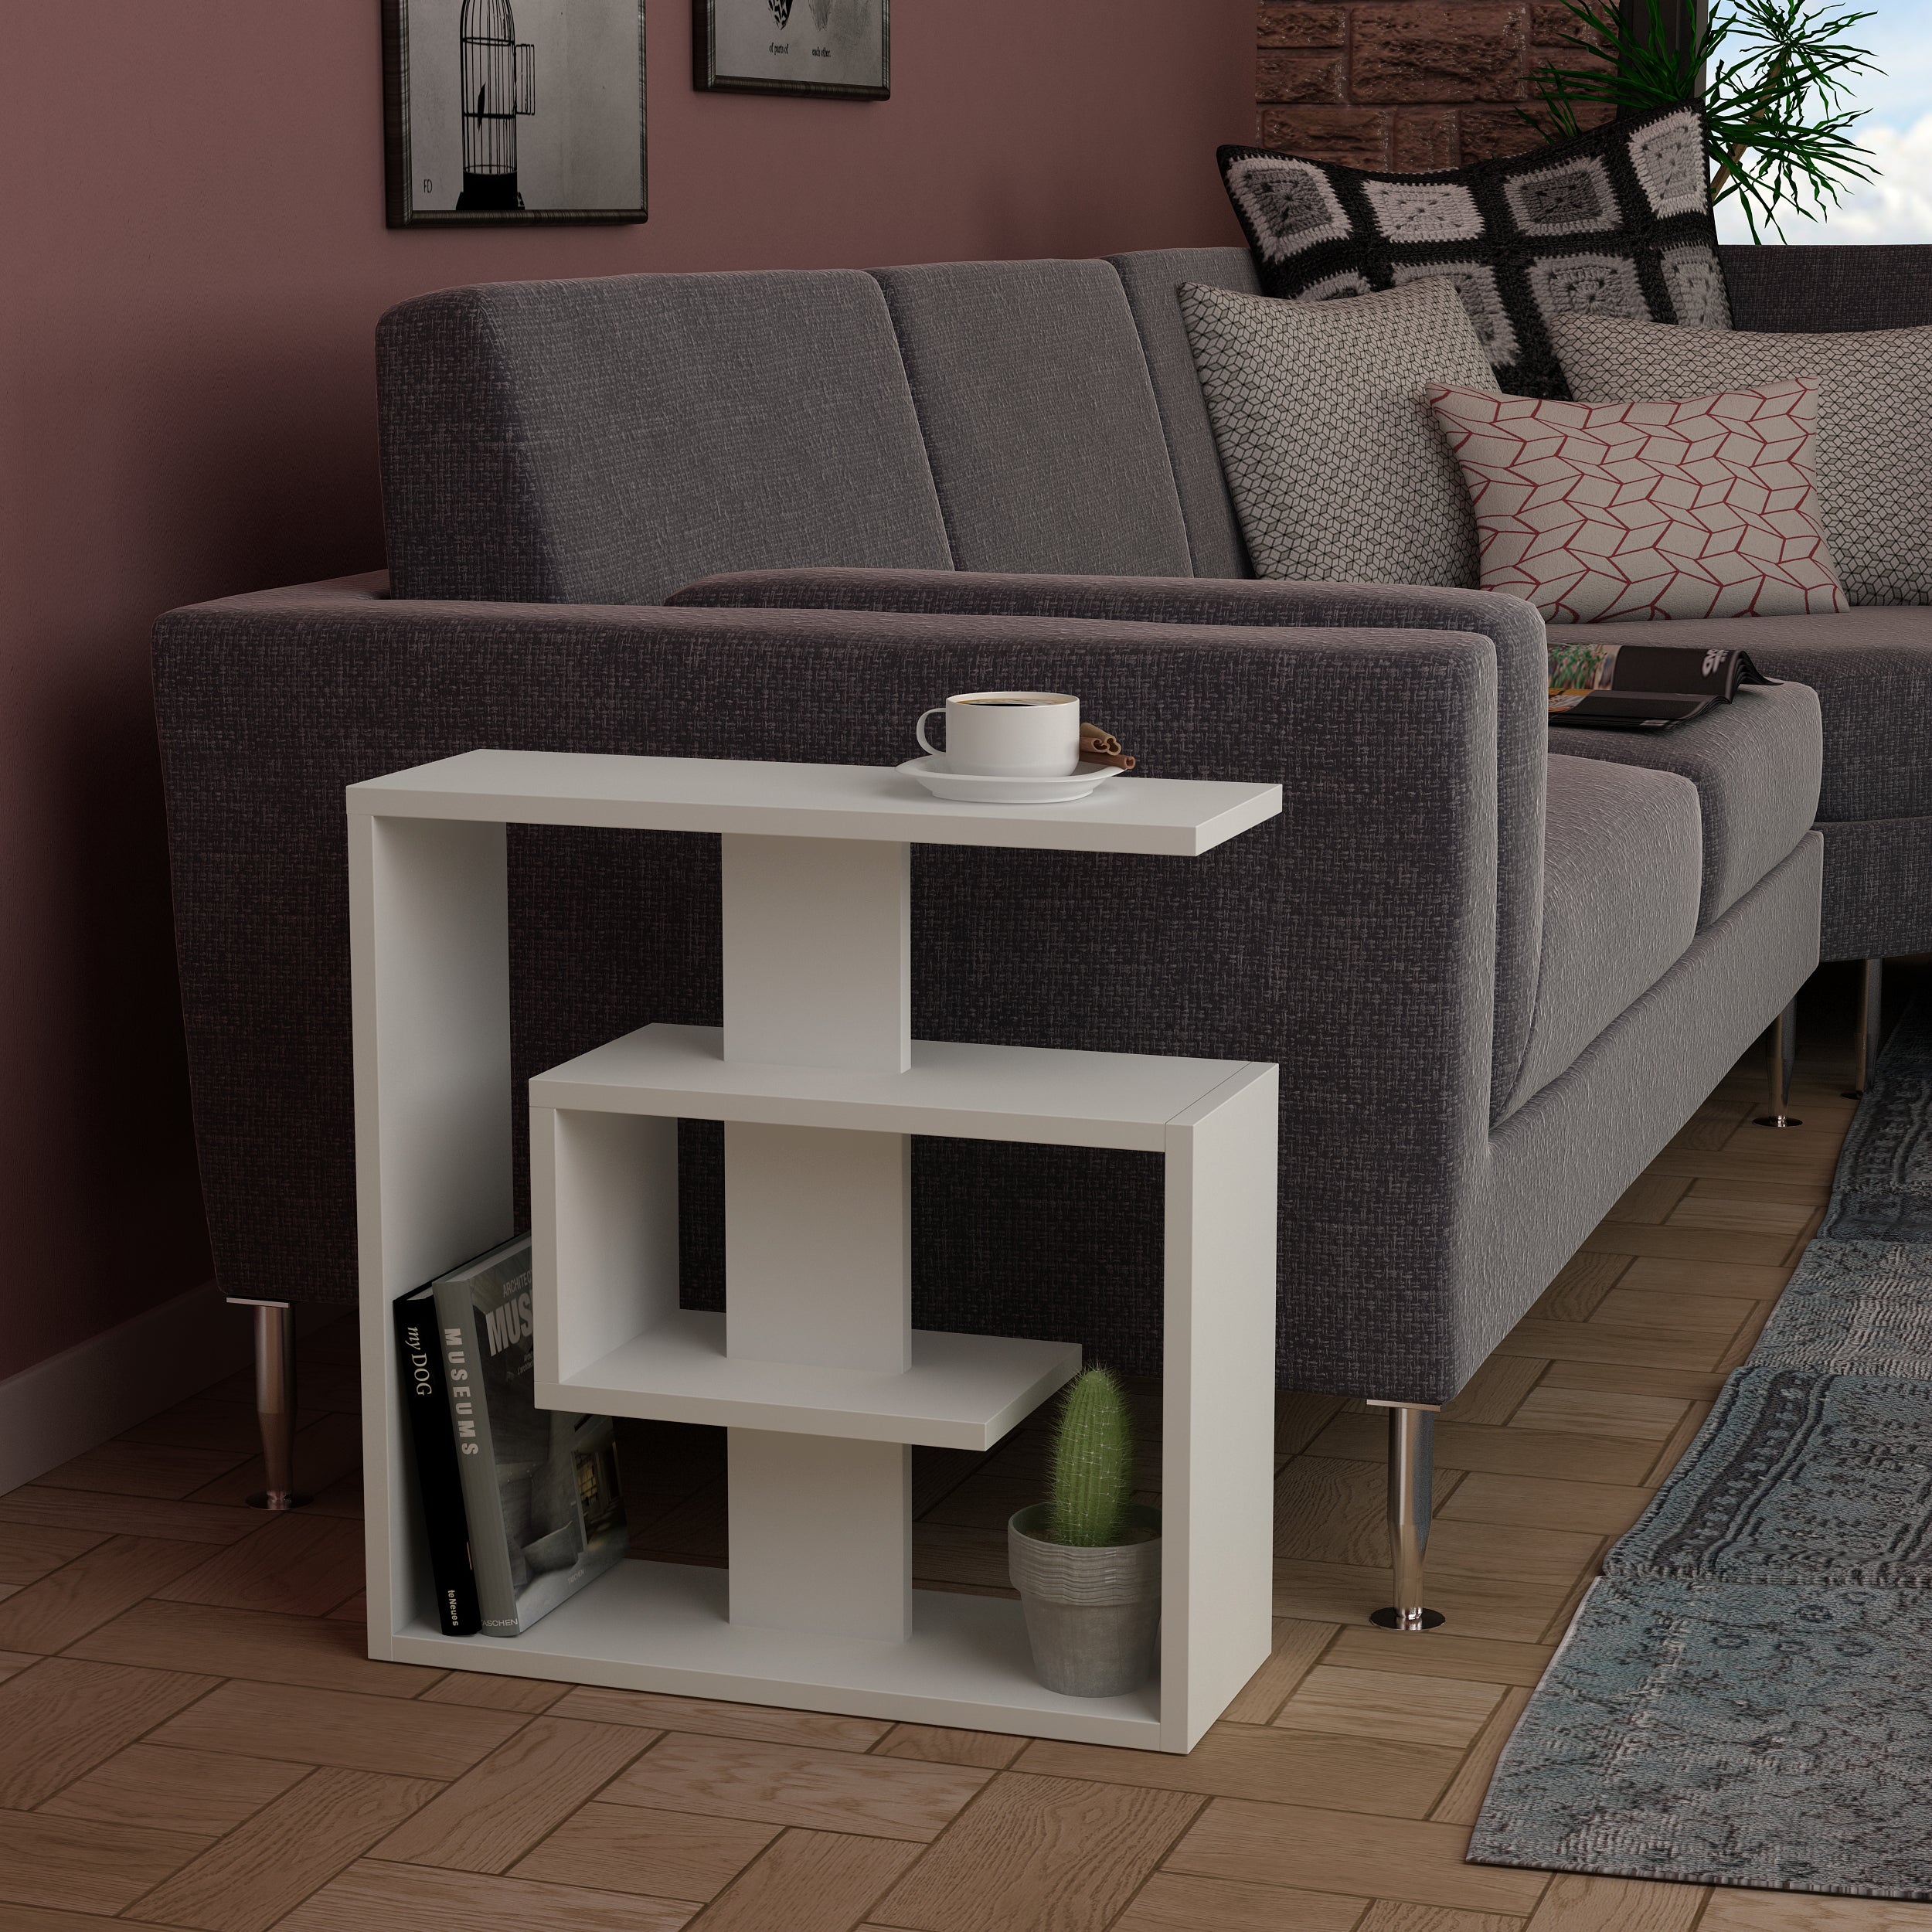 Saly Modern Side End Table Multipurpose With Creativeness H 57cm 3 Tier - Decortie